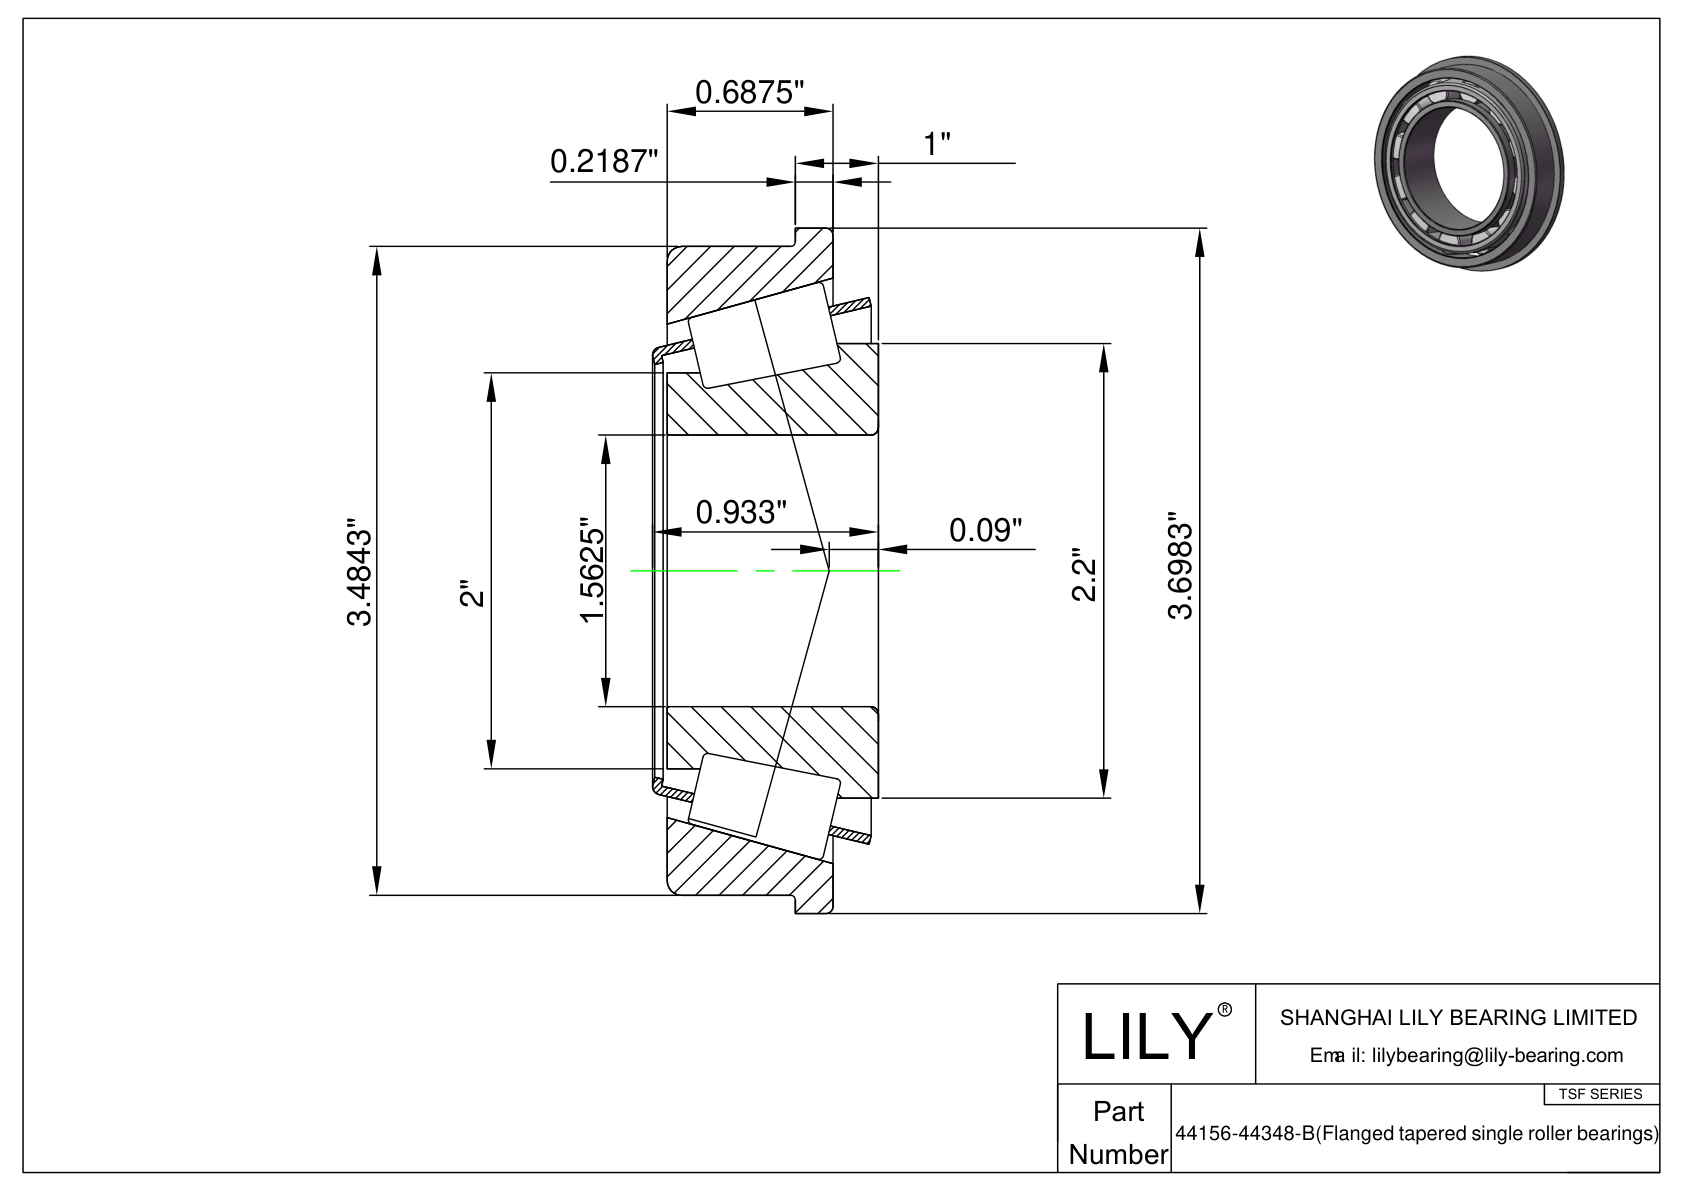 44156-44348-B TSF (Tapered Single Roller Bearings with Flange) (Imperial) cad drawing